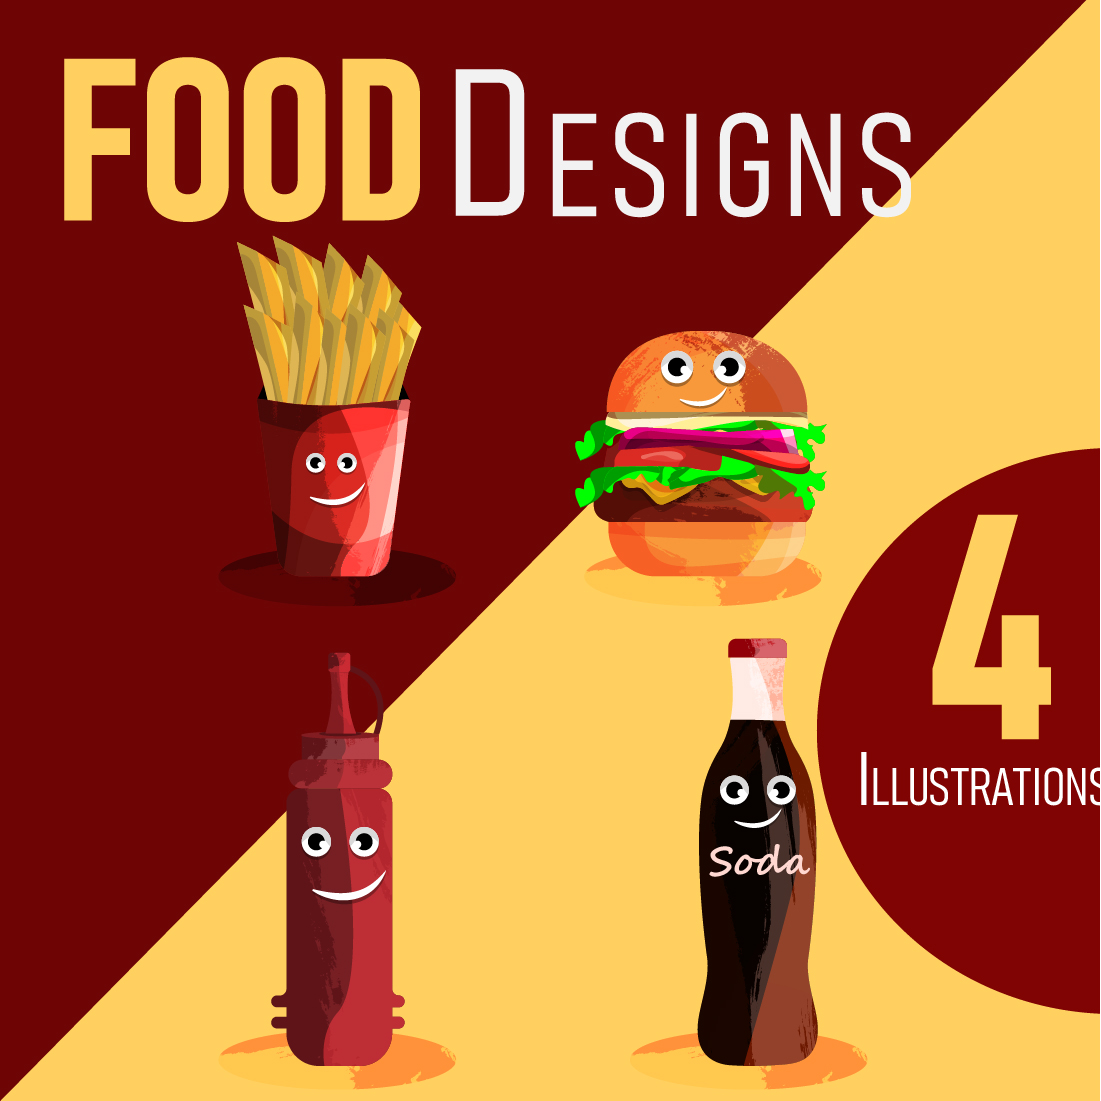 Fast Food Illustrations cover image.